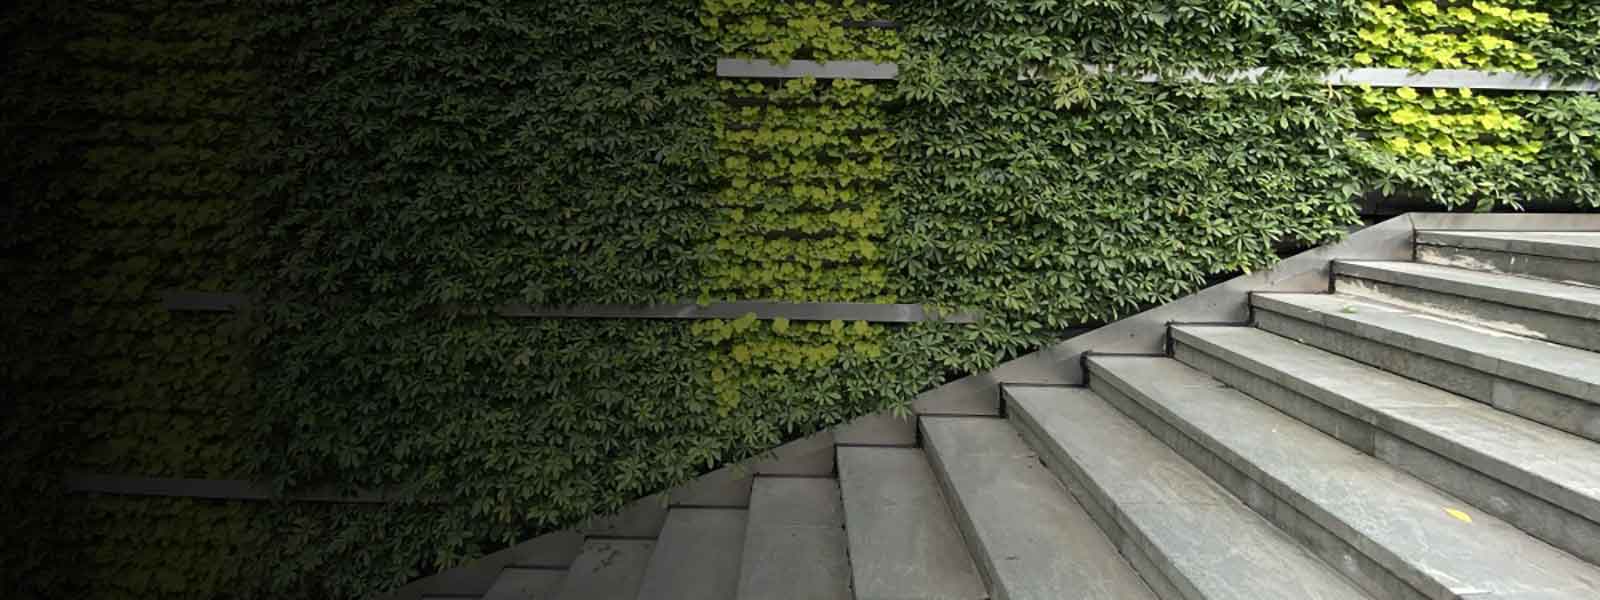 staircases in office space with greenary to control carbon emission